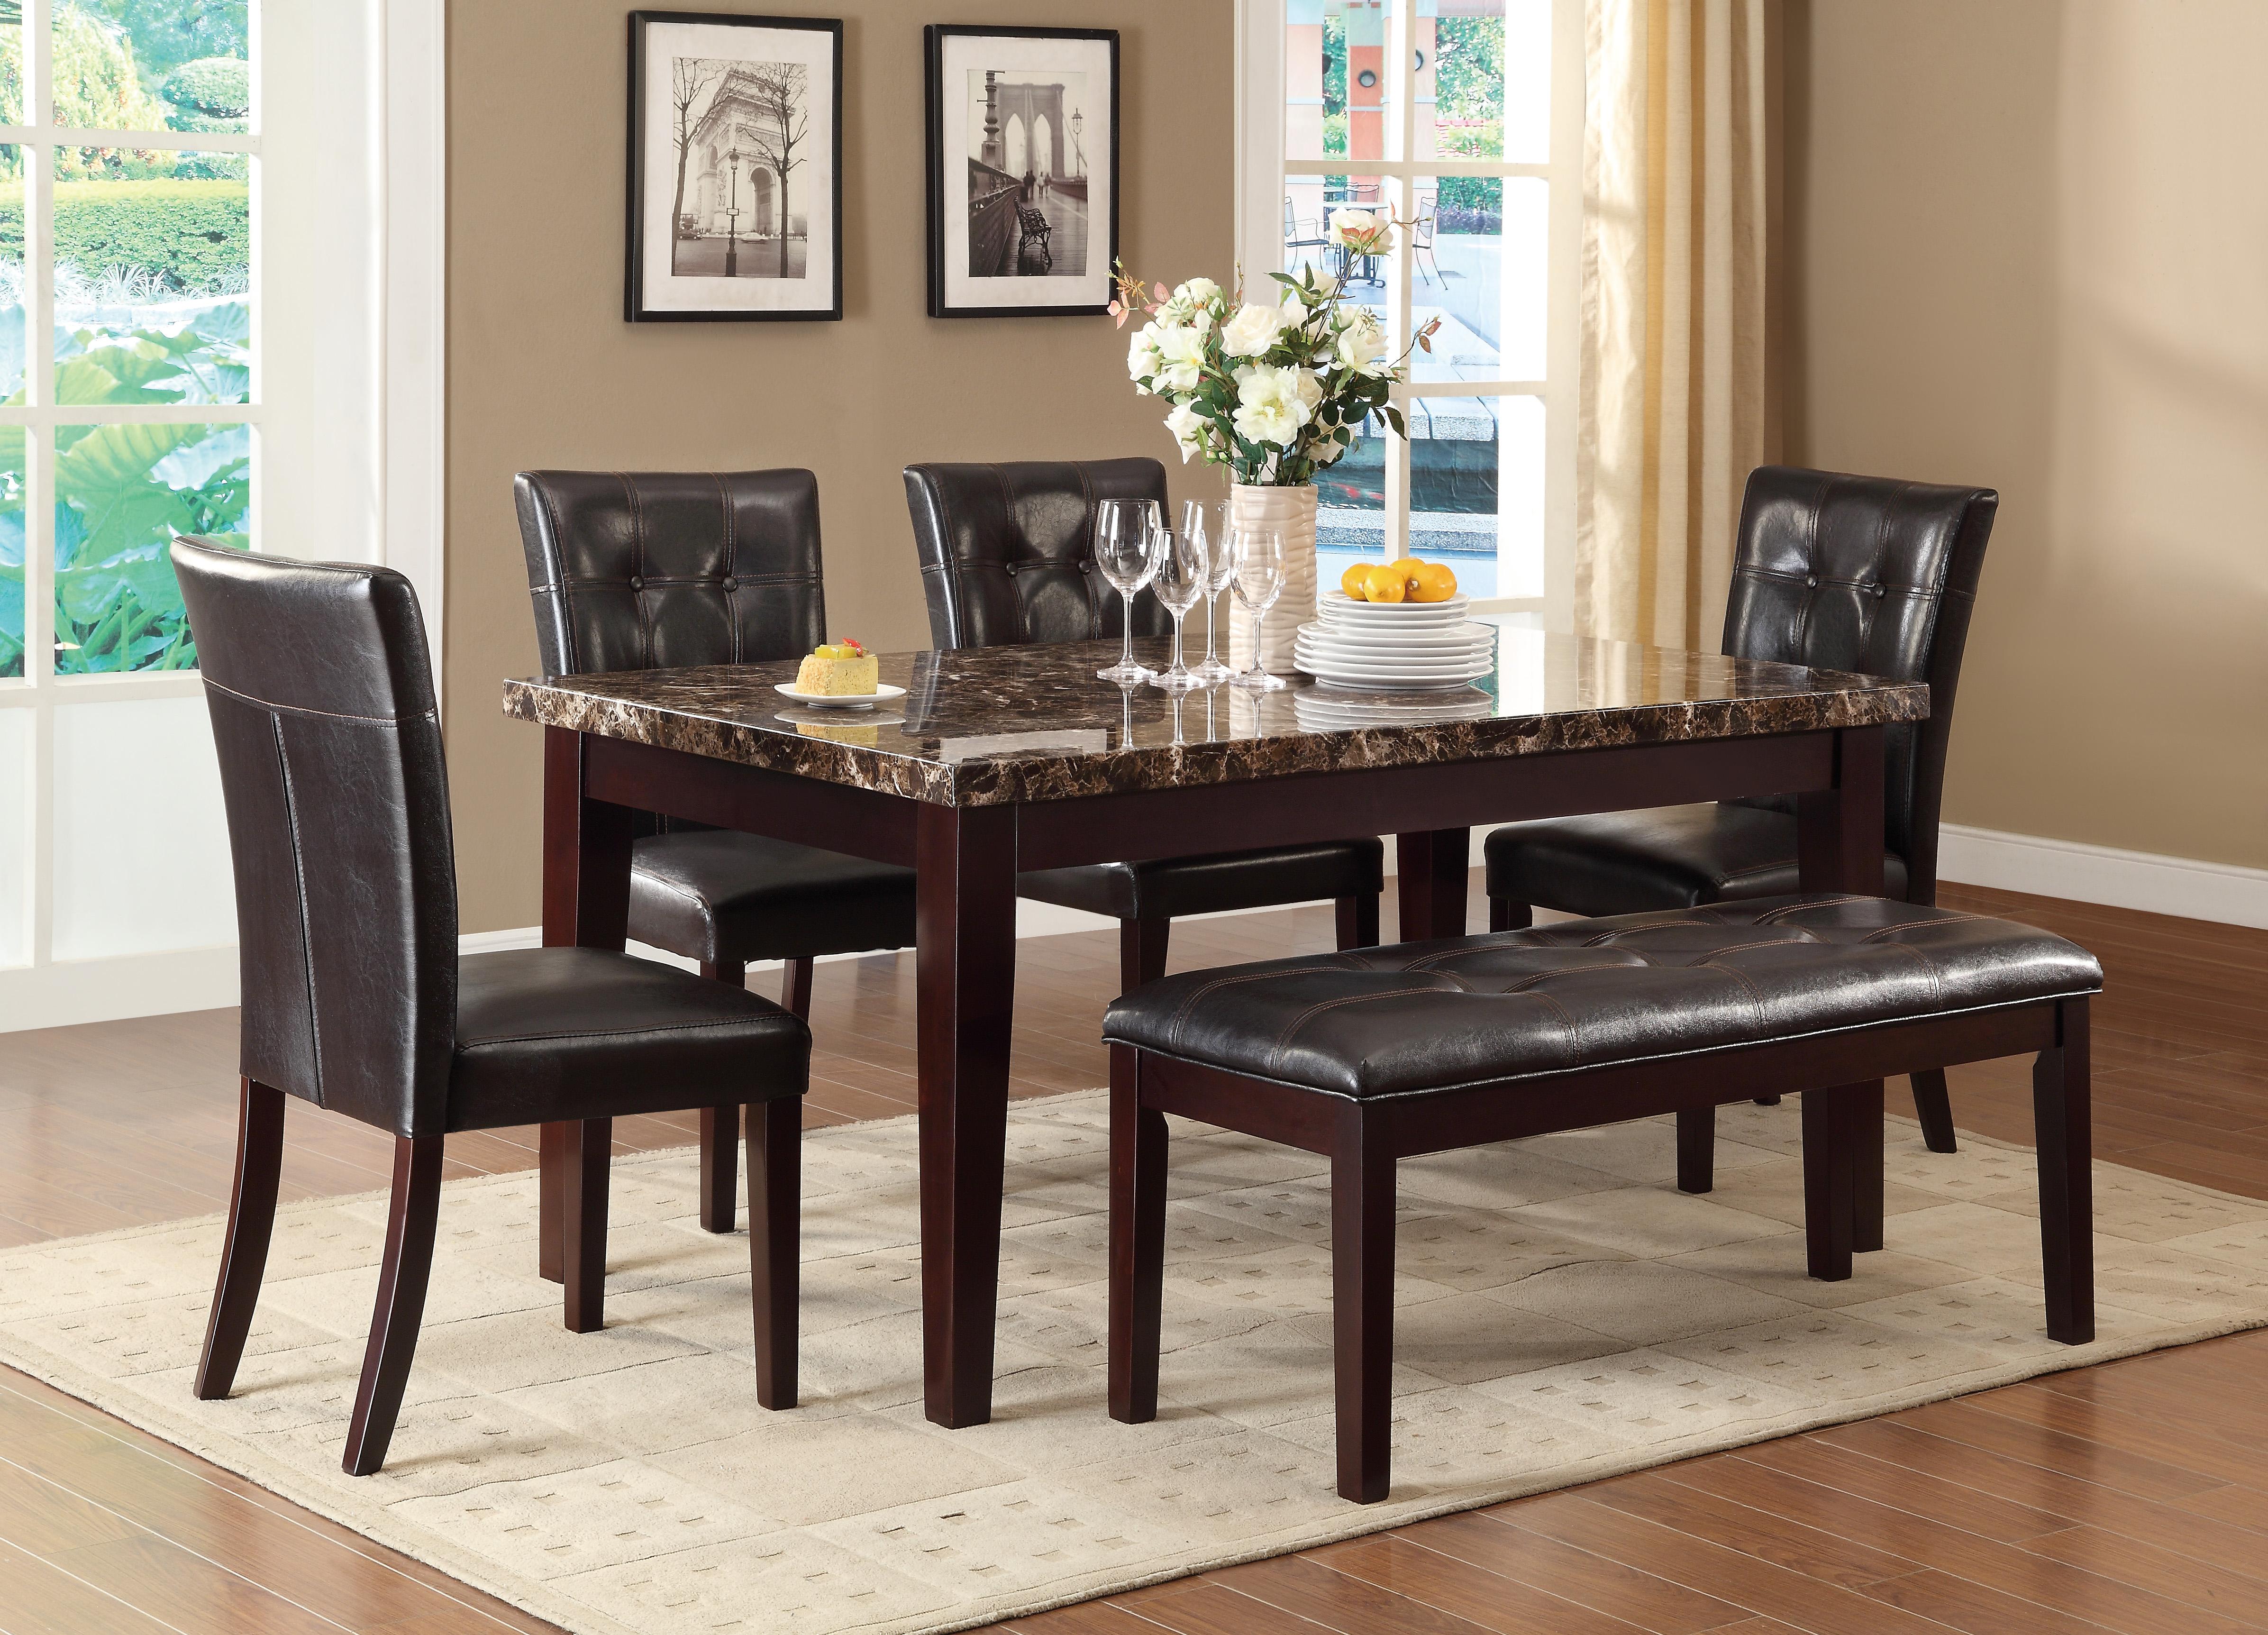 Transitional Dining Room Set 2544-64-6PC Teague 2544-64-6PC in Espresso Faux Leather